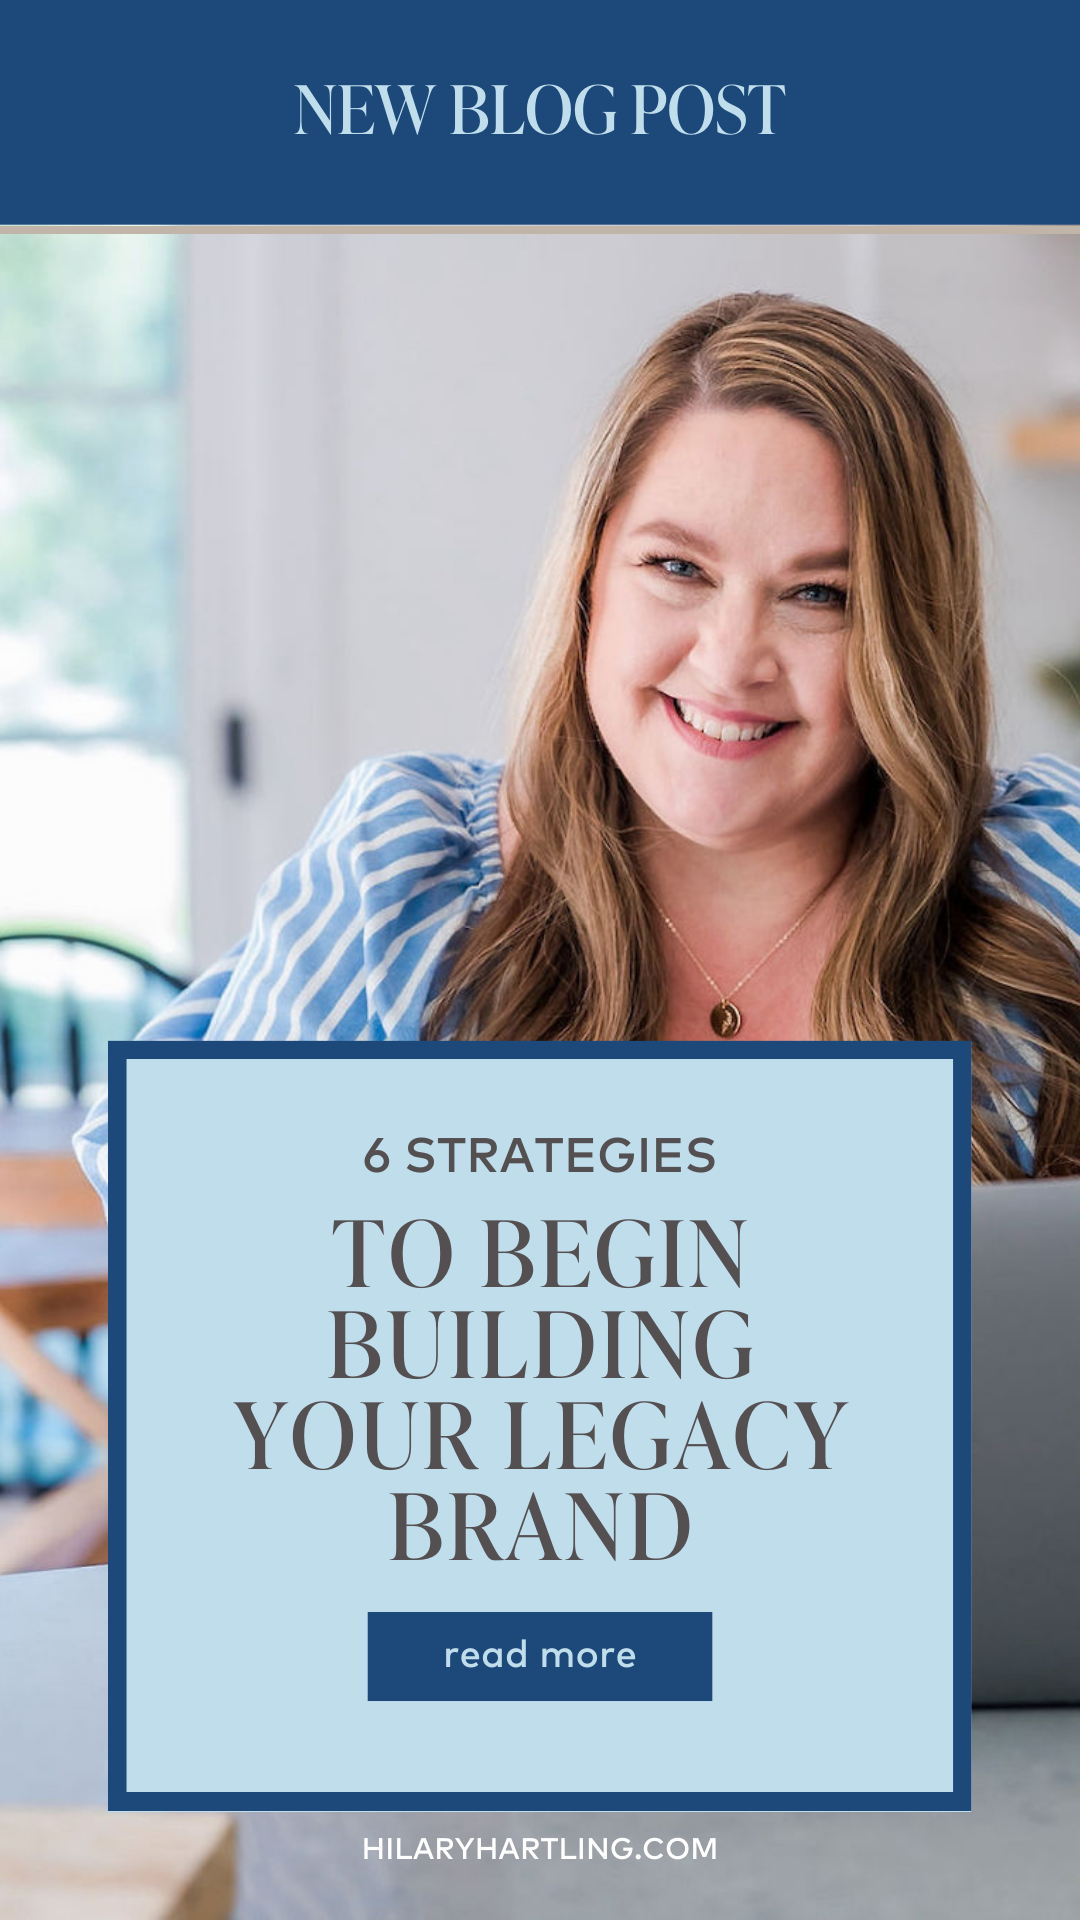 Developing Your Legacy: How Do You Want to be Remembered?